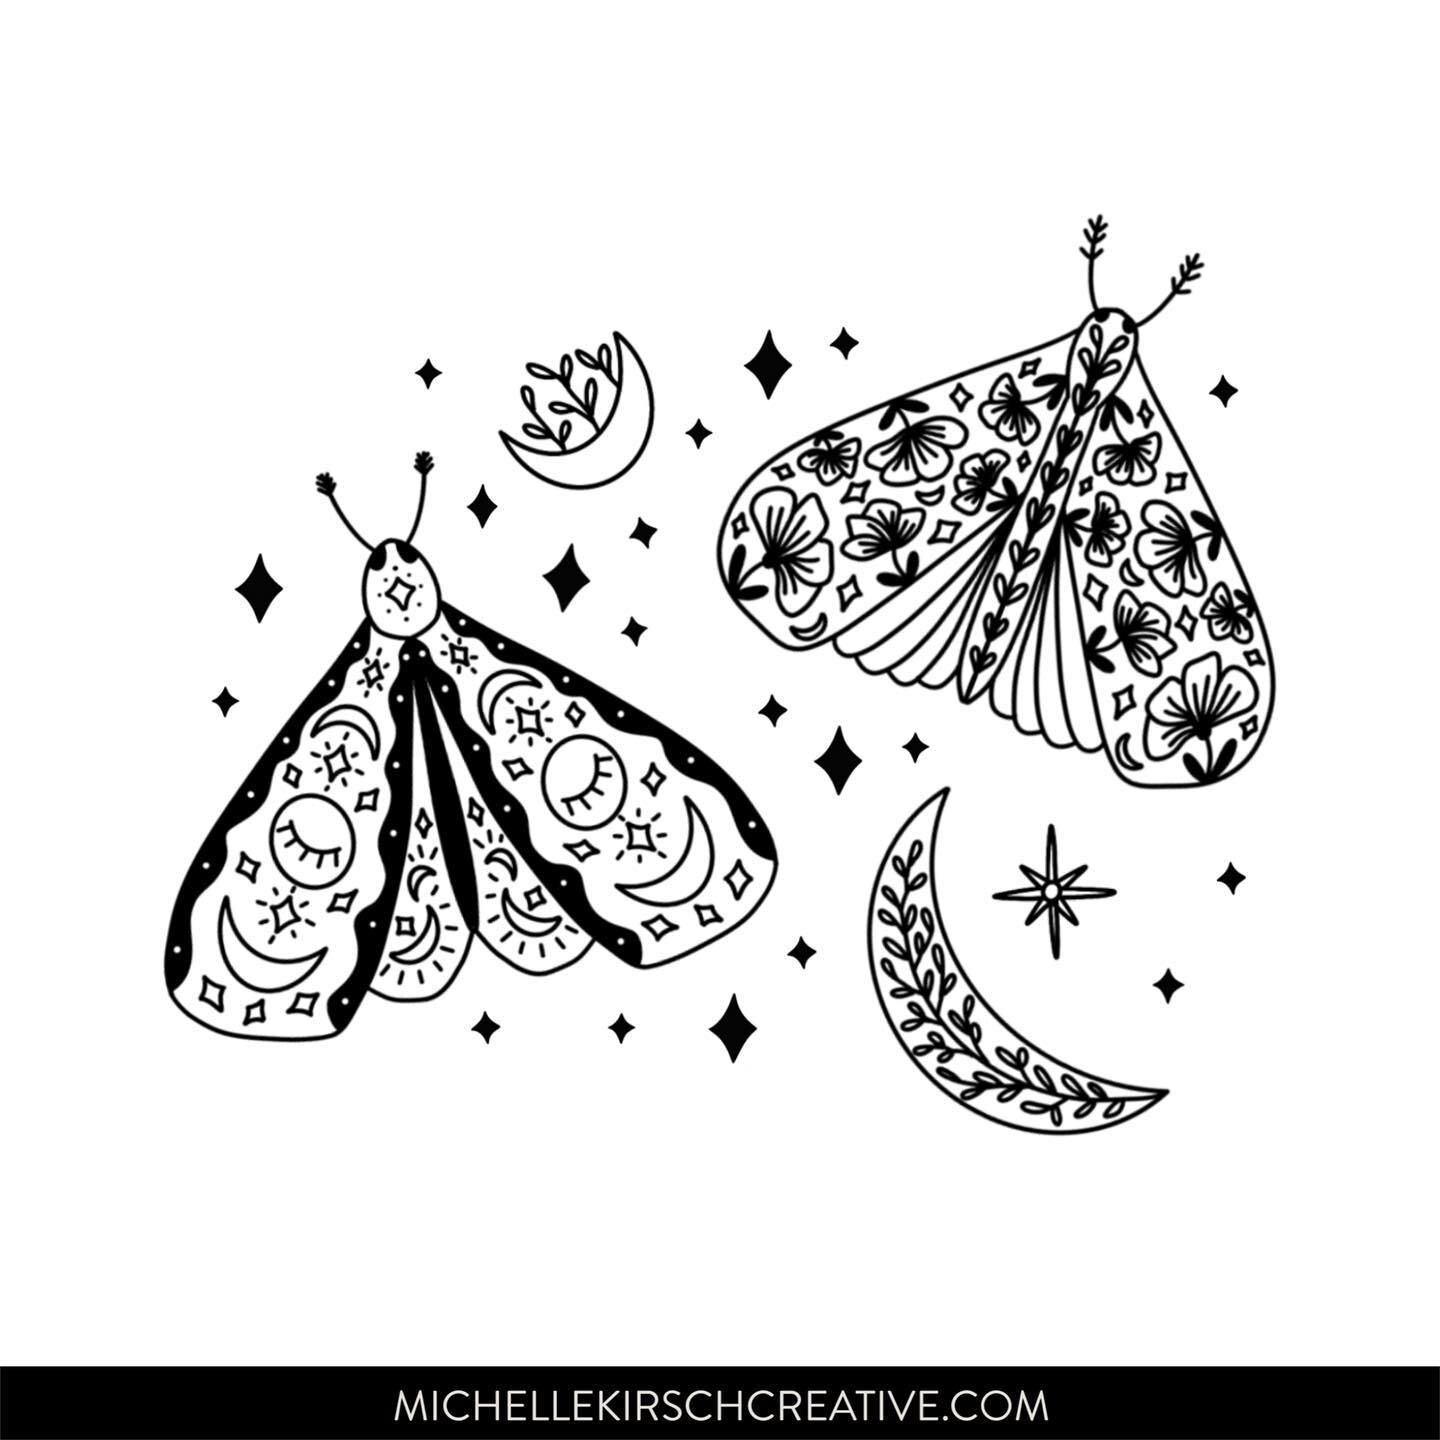 Starting the week with some moon + moth illustrations. 🌙 ✨

#mothillustration #moonillustration #celestrial